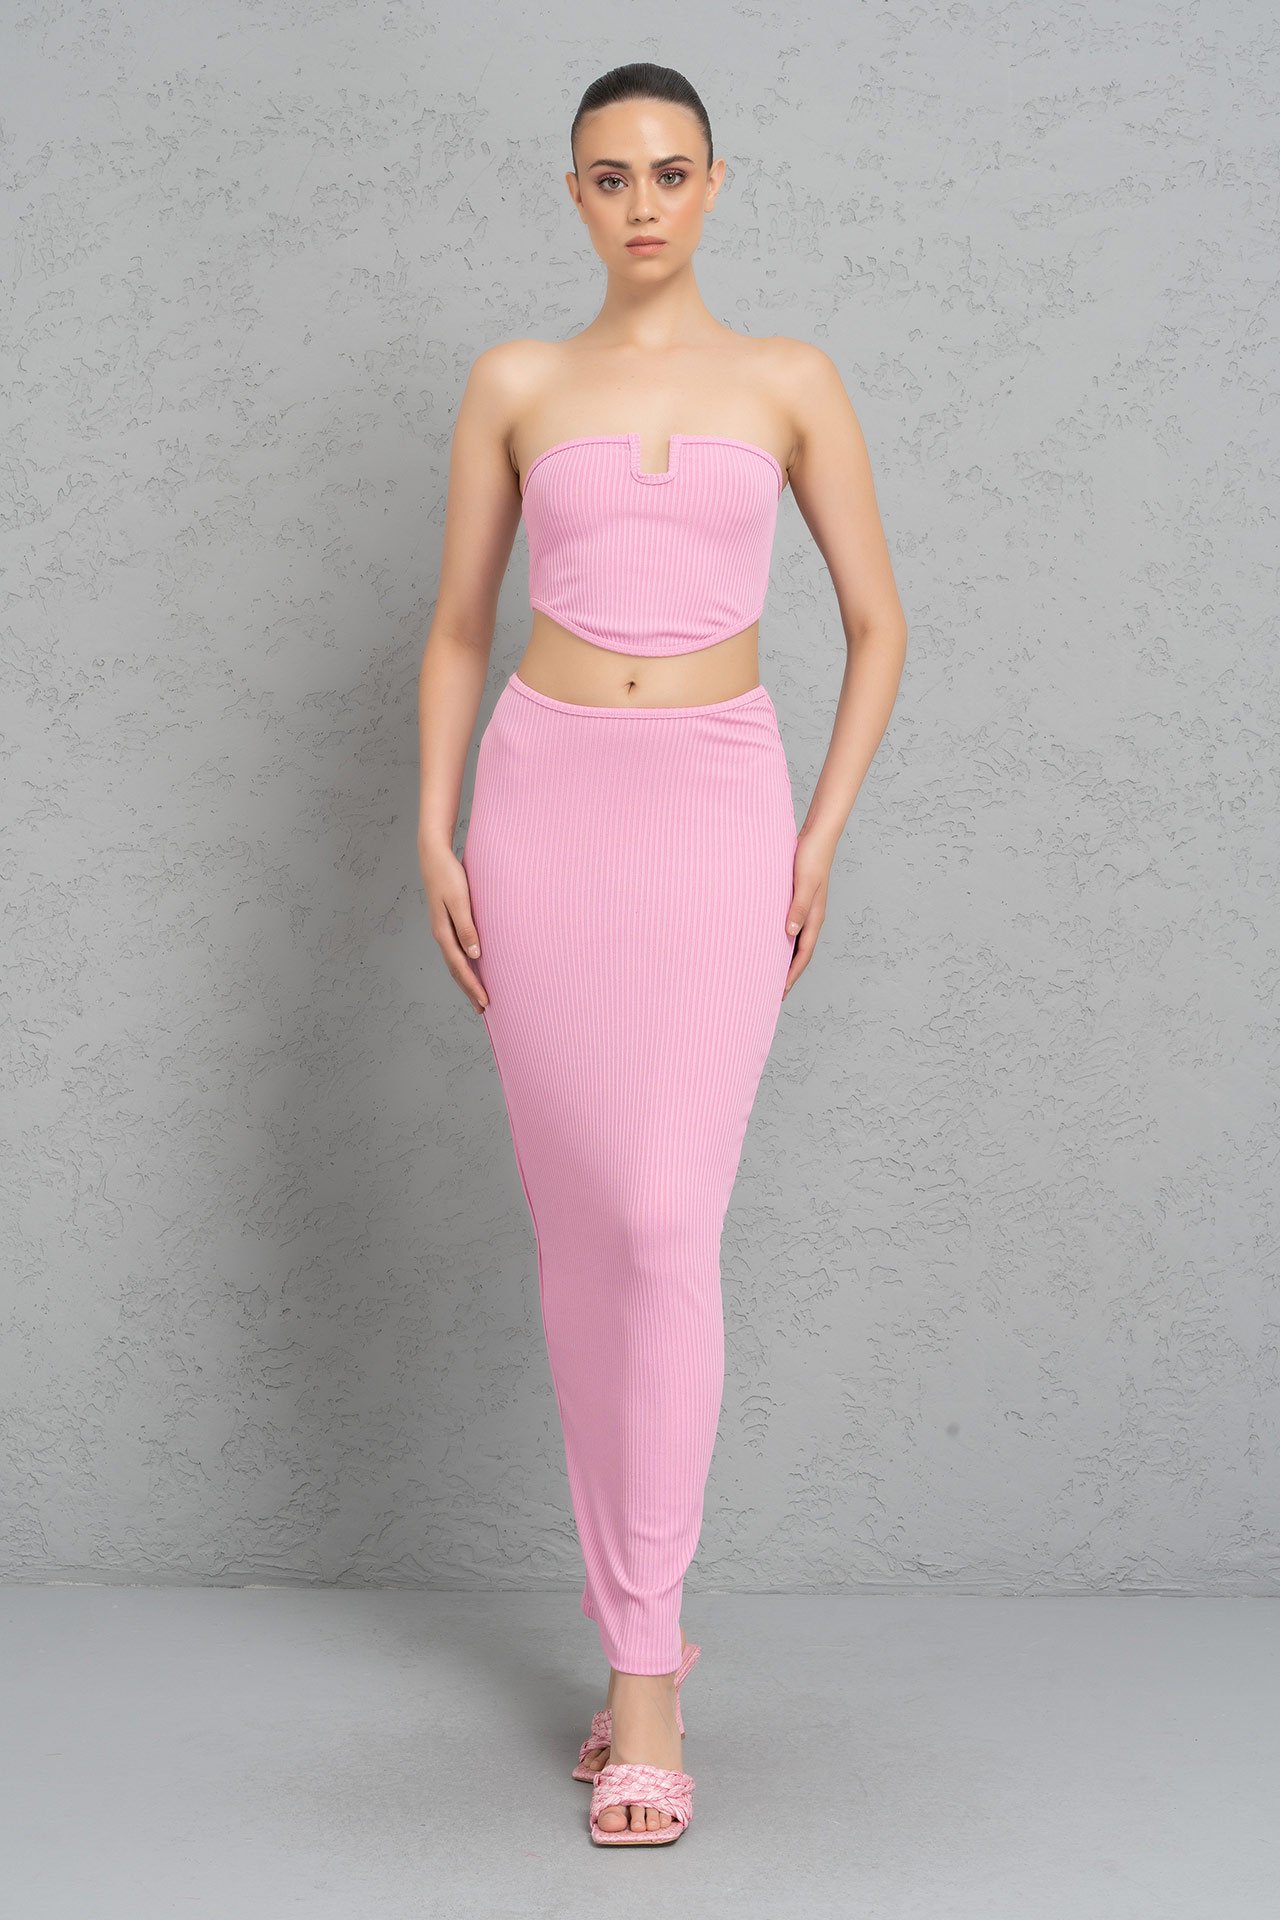 New Pink U-Wire Tube Top & Skirt Set